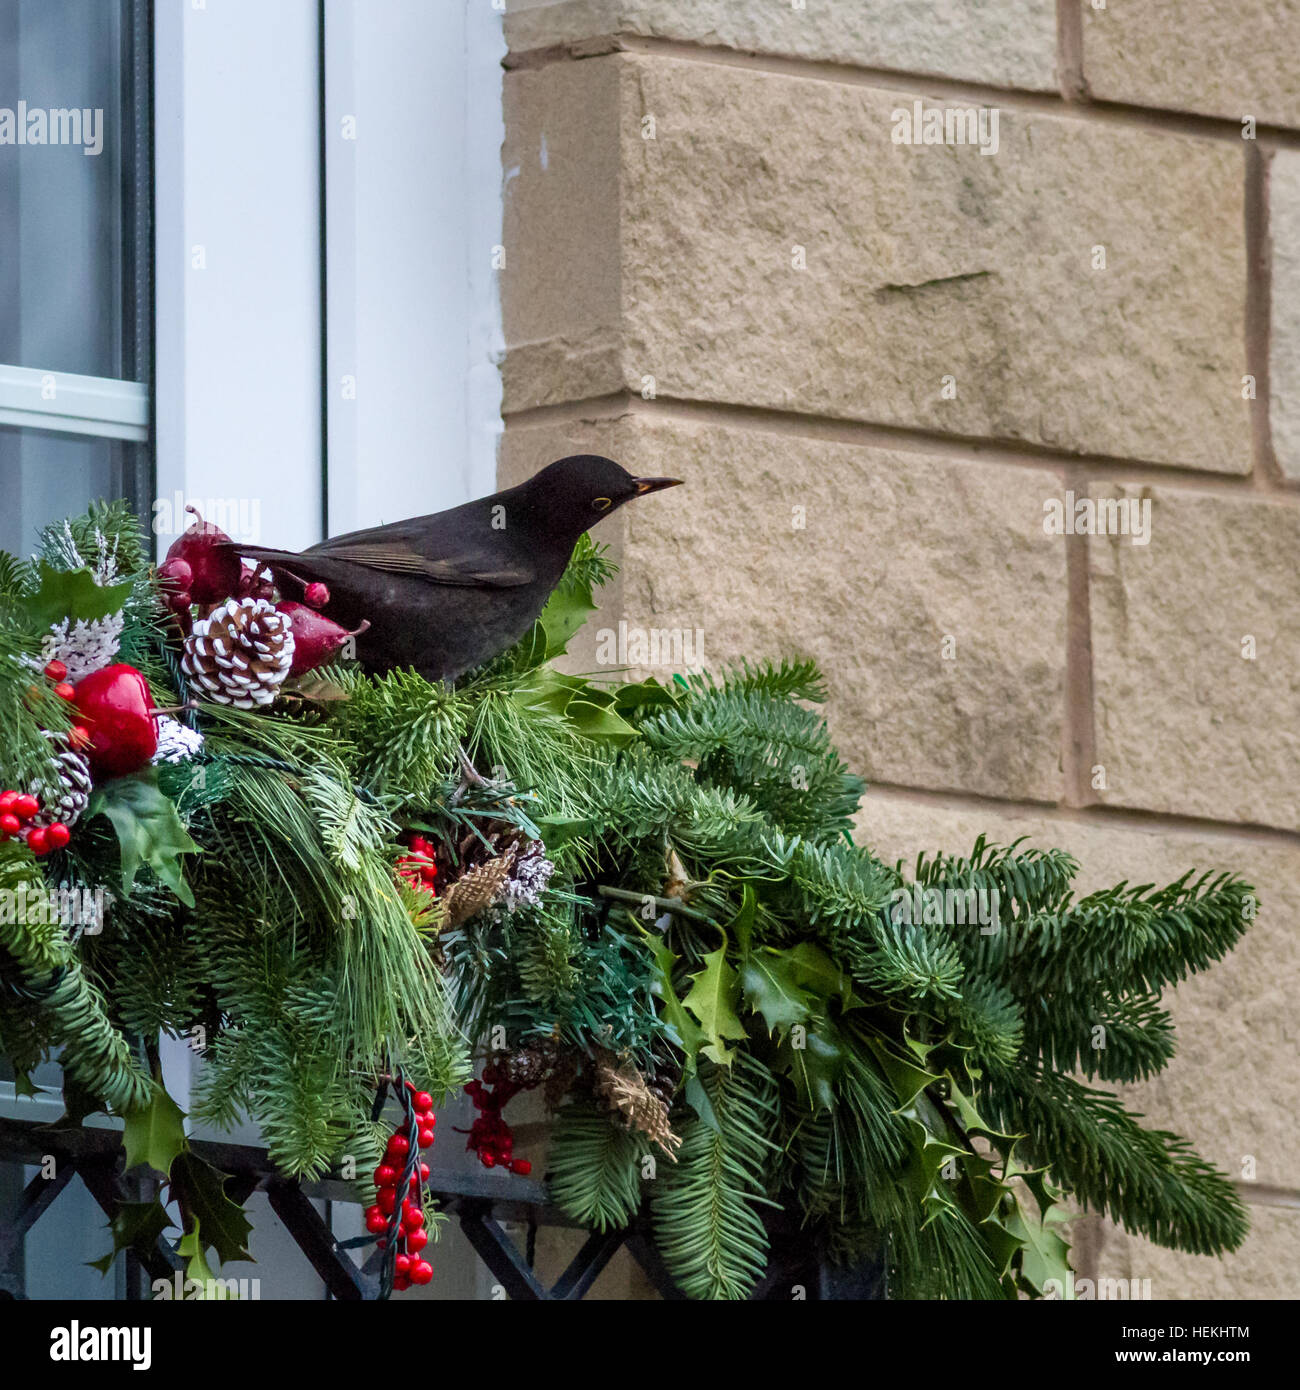 Burley-in-Wharfedale, West Yorkshire, UK. 21st December 2016.  First year male blackbird finds Christmas confusing as it searches for real berries among a Christmas decoration. Burley-in-Wharfedale, West Yorkshire UK. Rebecca Cole/Alamy Live News Stock Photo